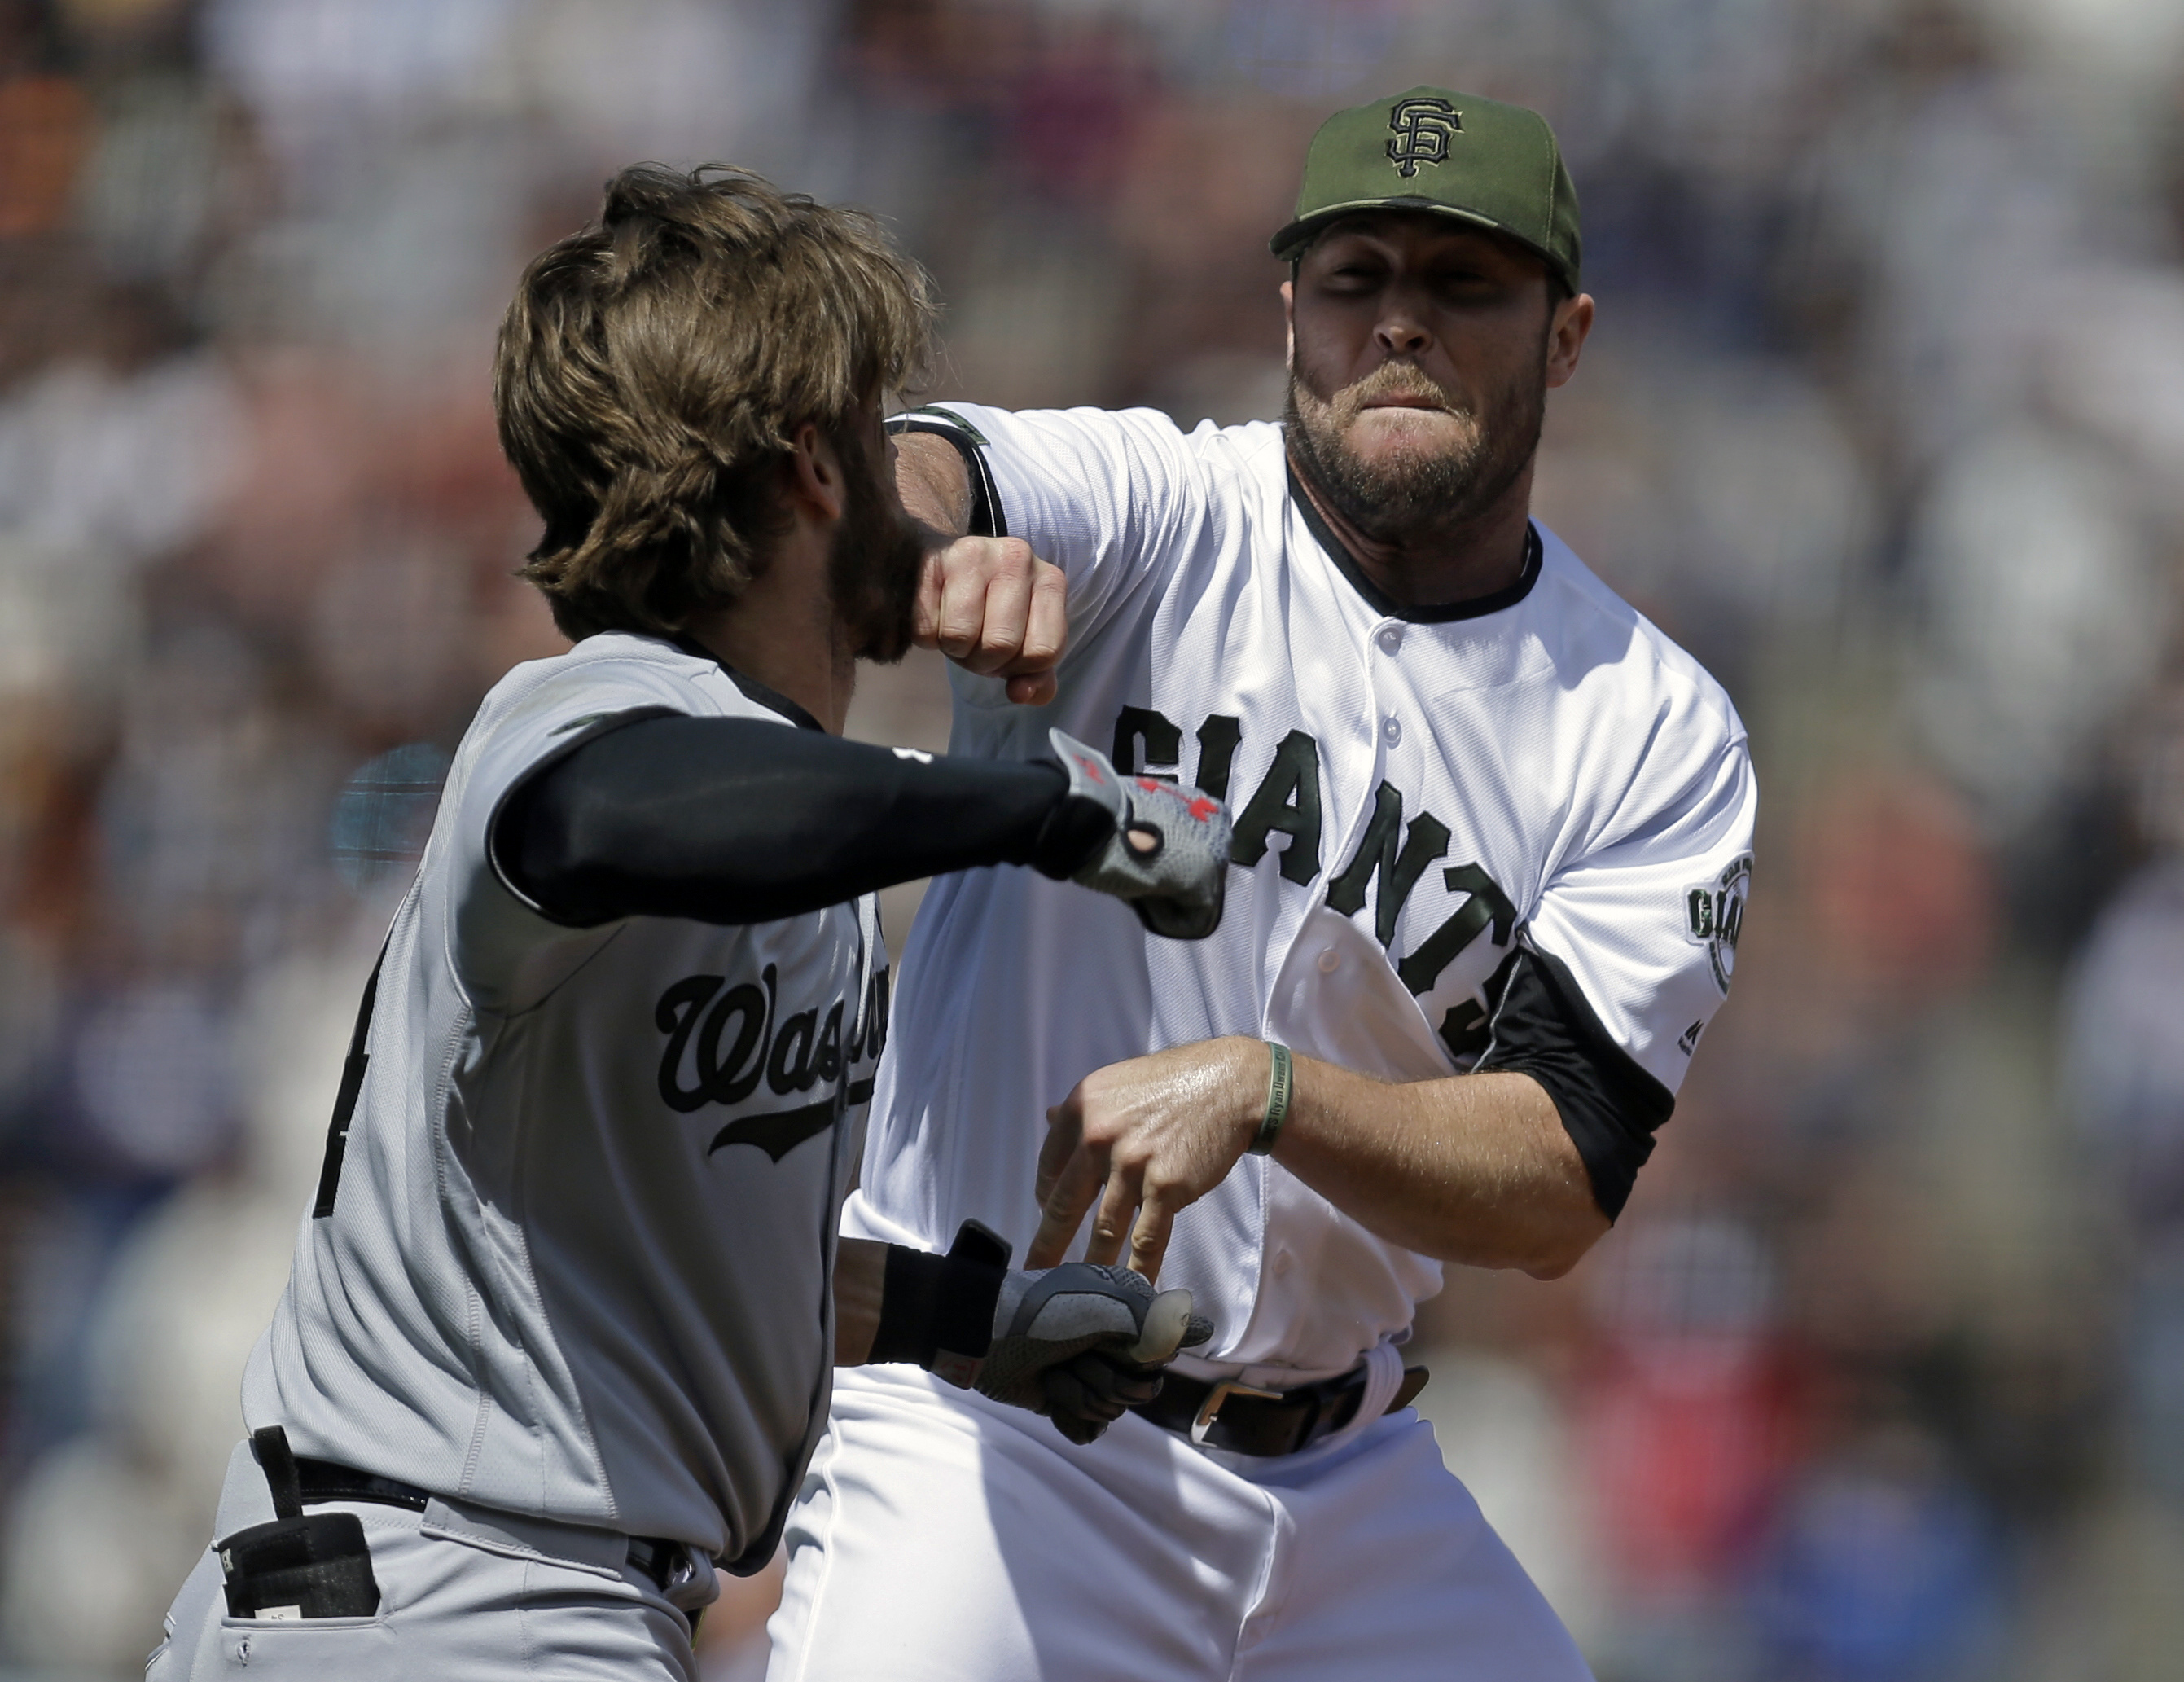 Nightengale: Strickland-Harper Brawl Ended Morse’s Career – and Could Have Been Worse